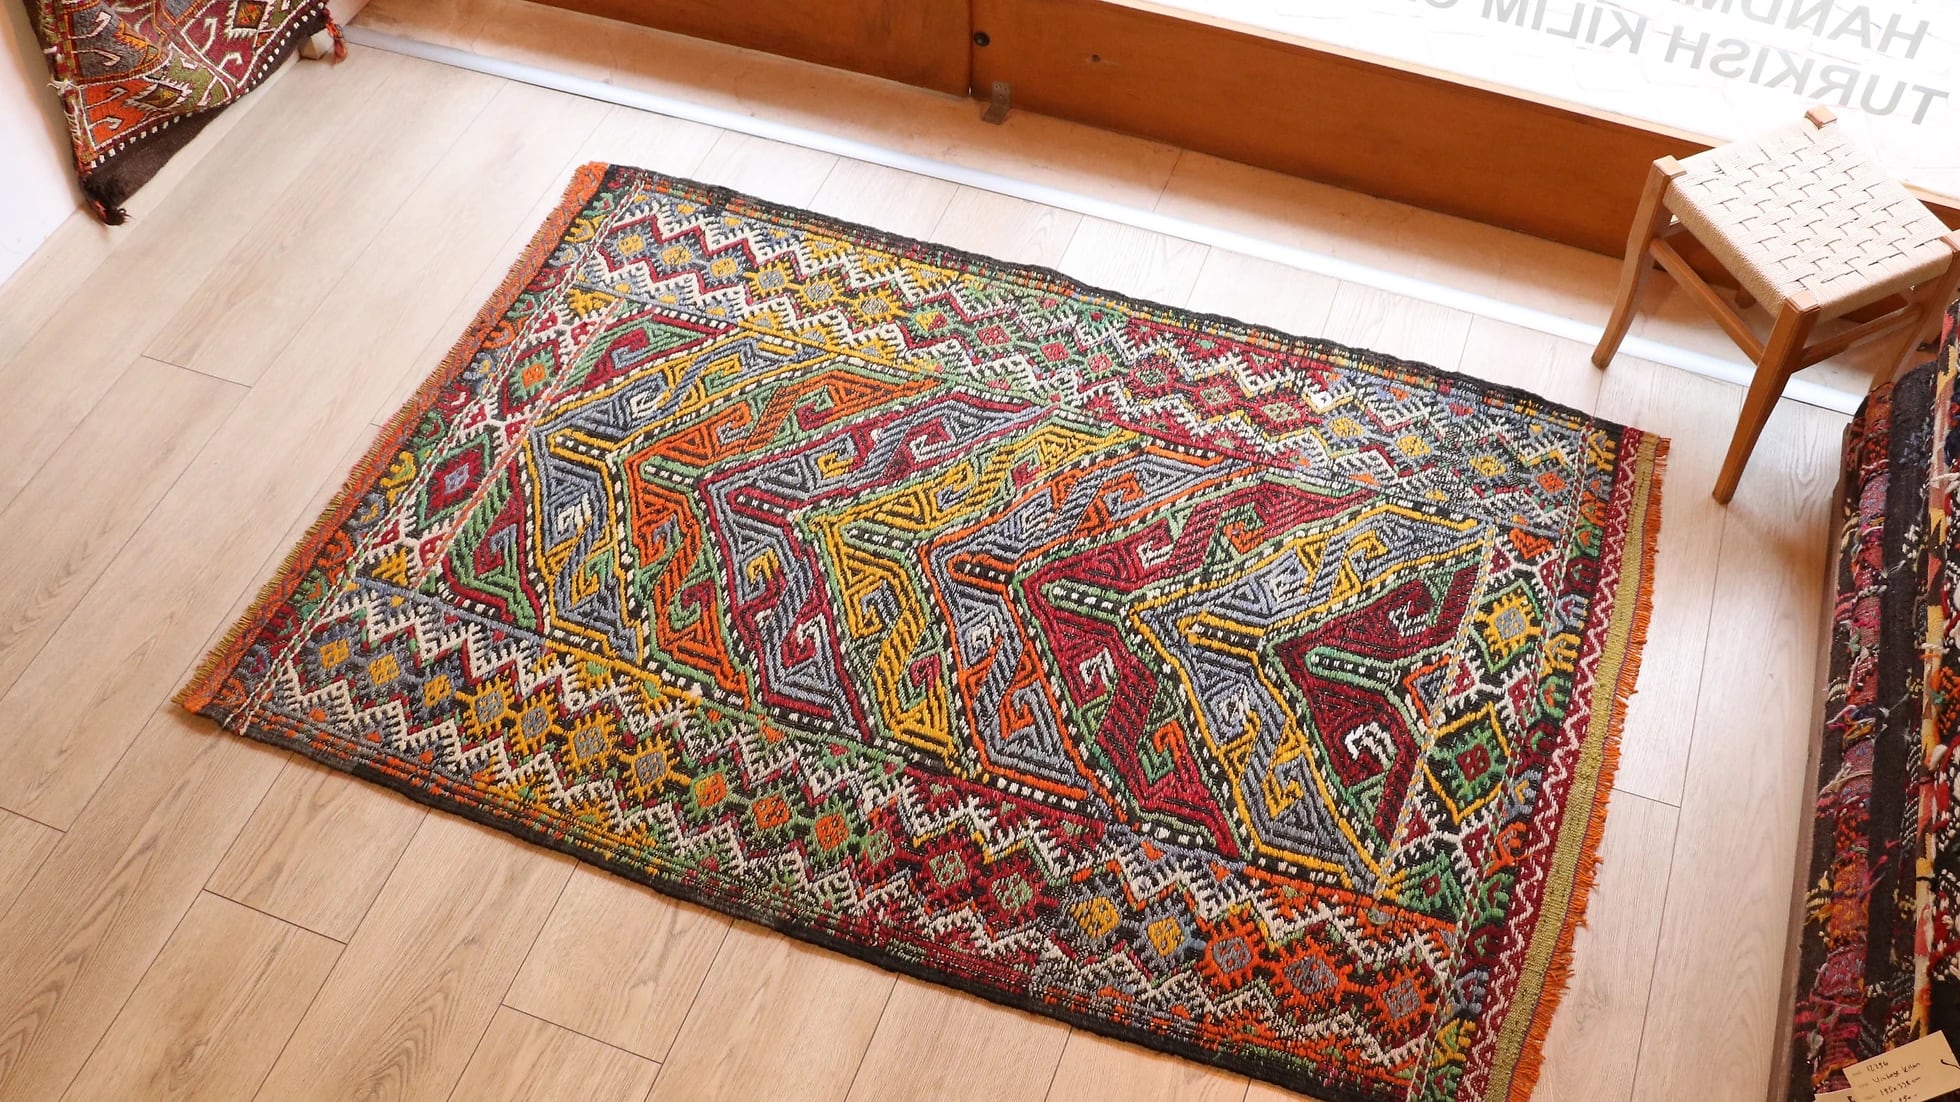 vintage mid-century Turkish rug from 1950s featuring traditional kilim motifs in many vivid and vibrant colors